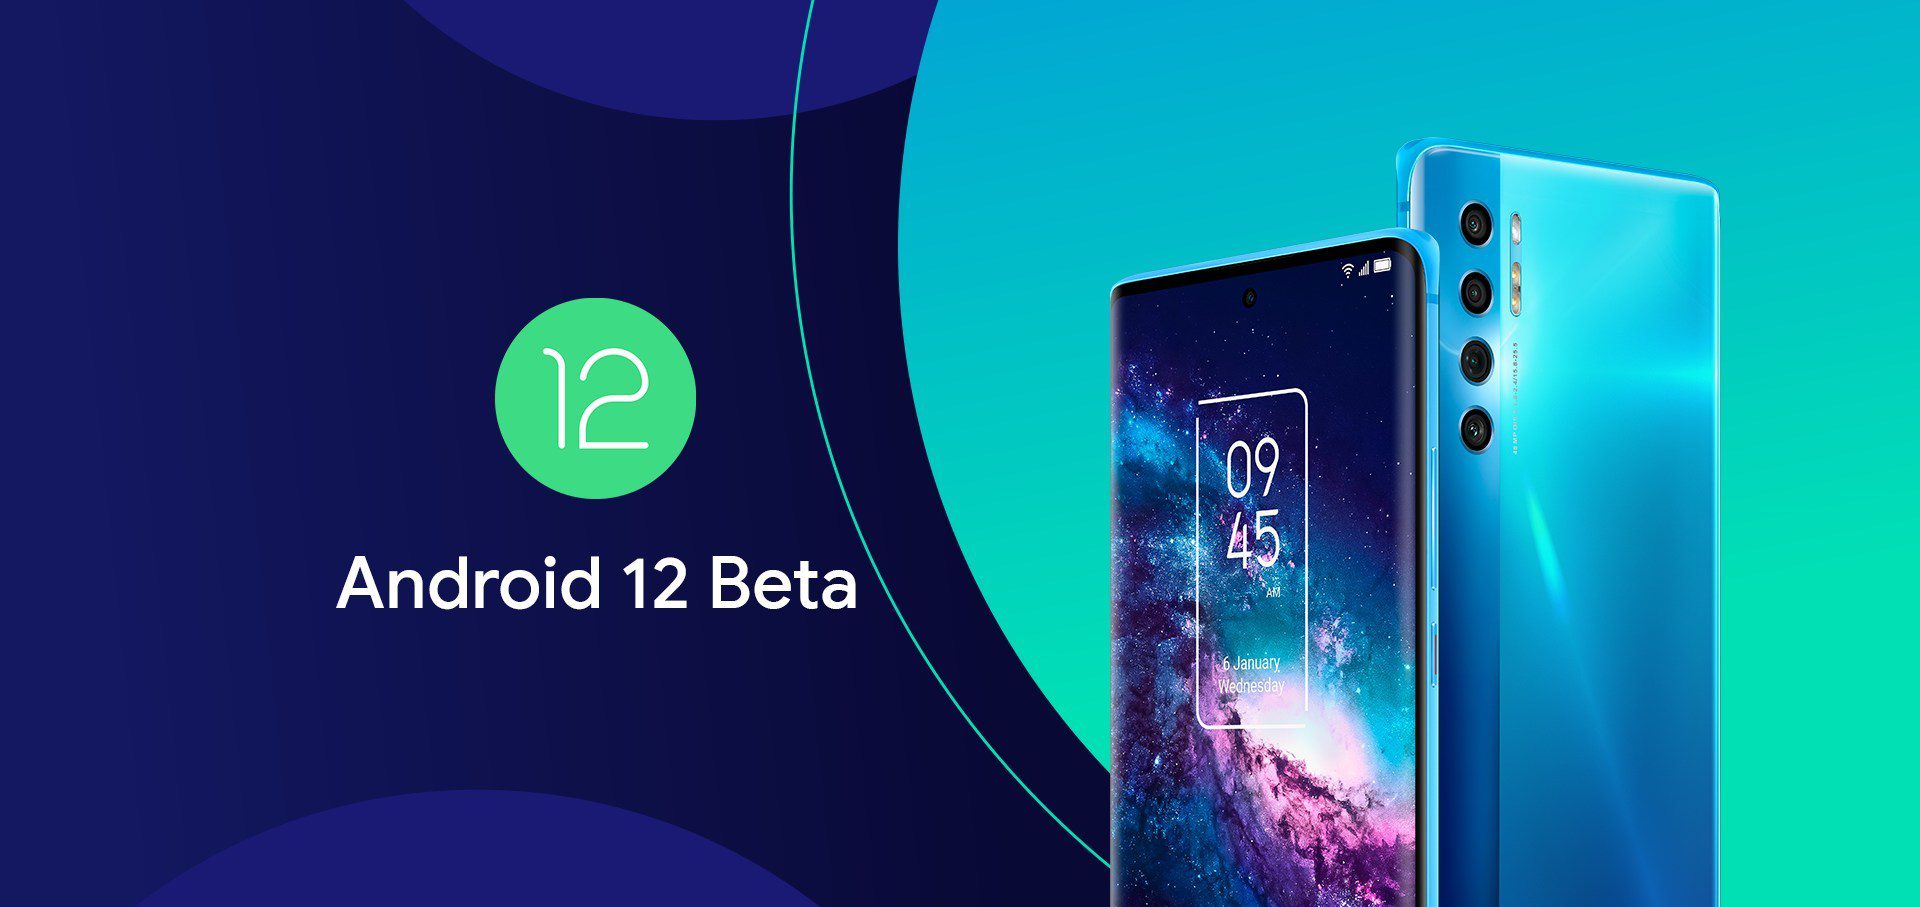 TCL 20 Pro 5G Android 12 Beta